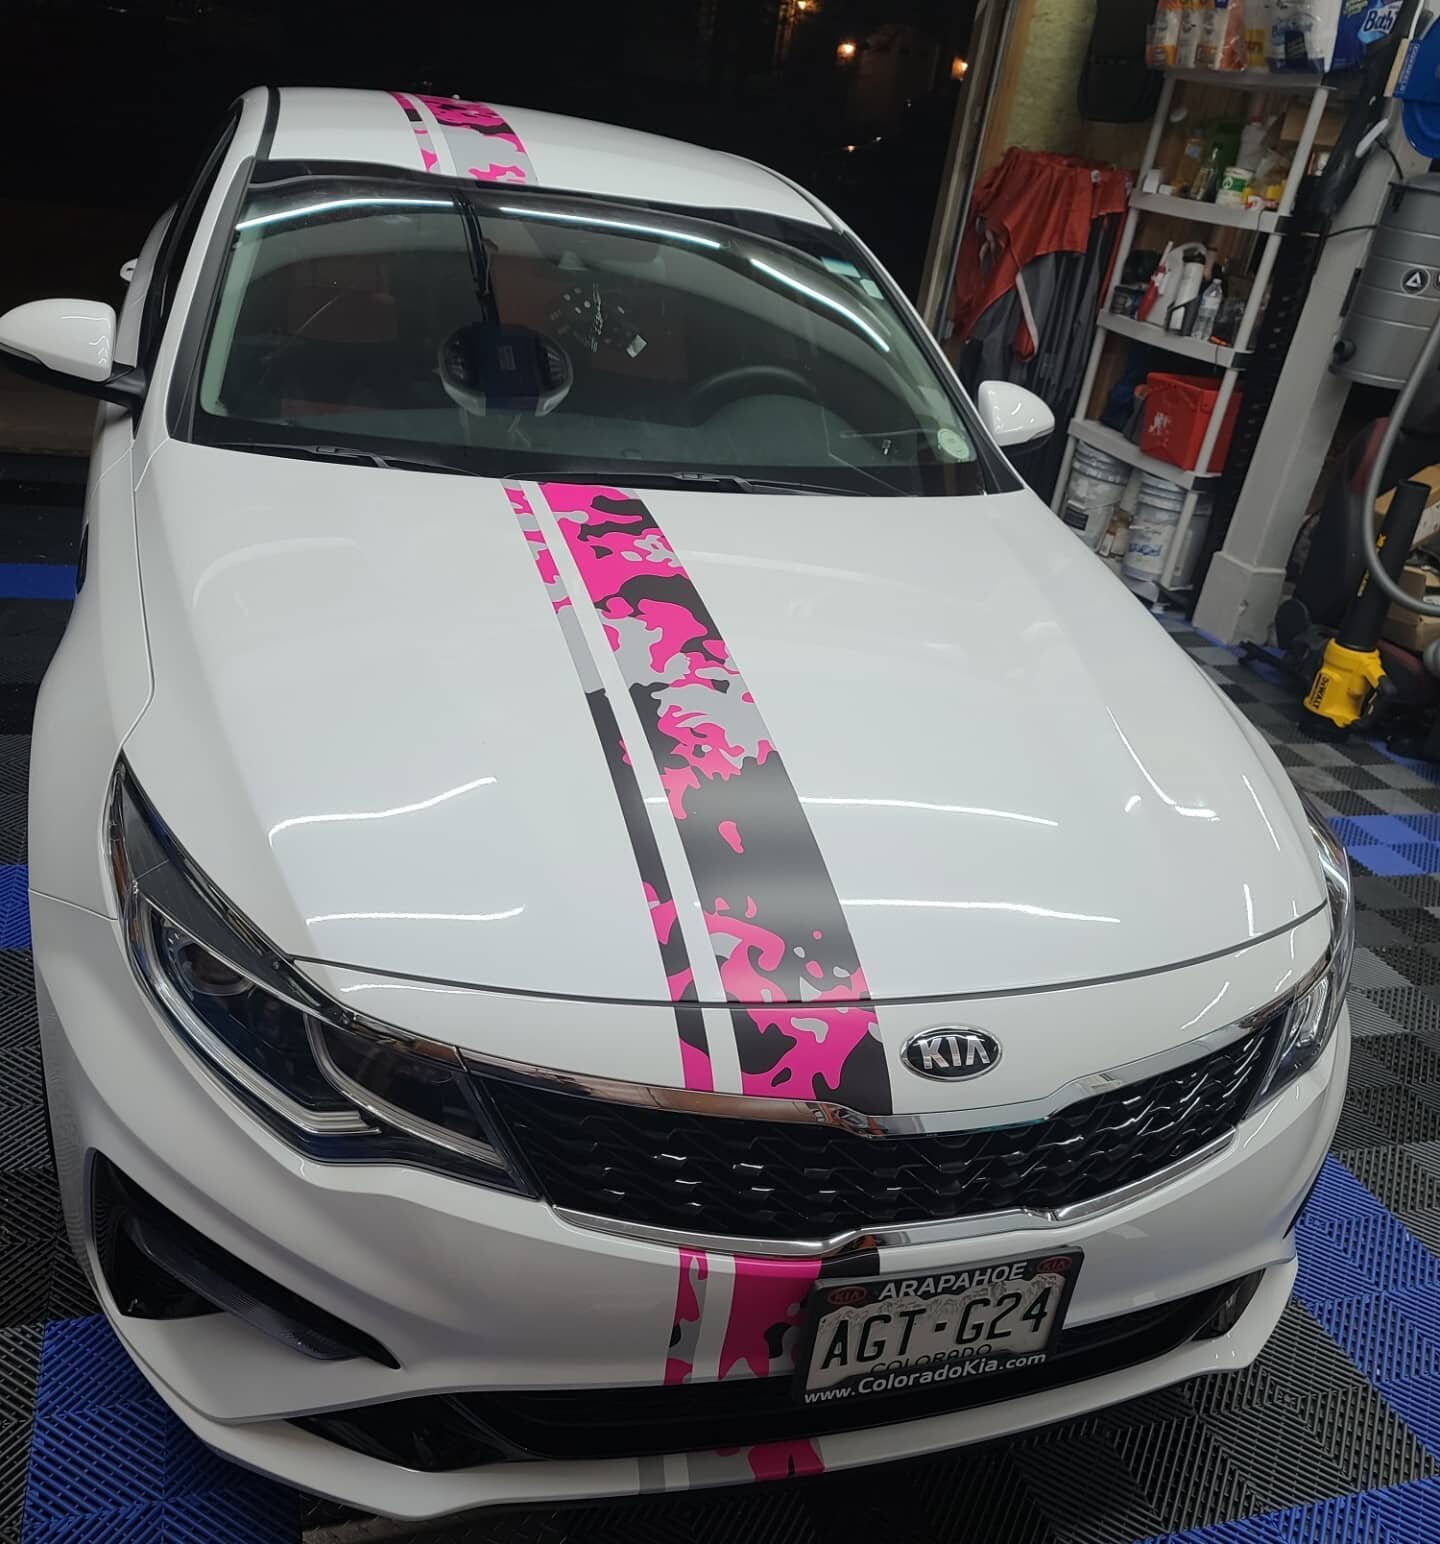 Finished up a printed Camo stripe for a client that wanted to add a little touch to her Kia!  Special shoutout to @whoozys_wraps for helping us to lay down these great looking stripes!!

☆☆☆☆------------------------------☆☆☆☆
We can make your custom 